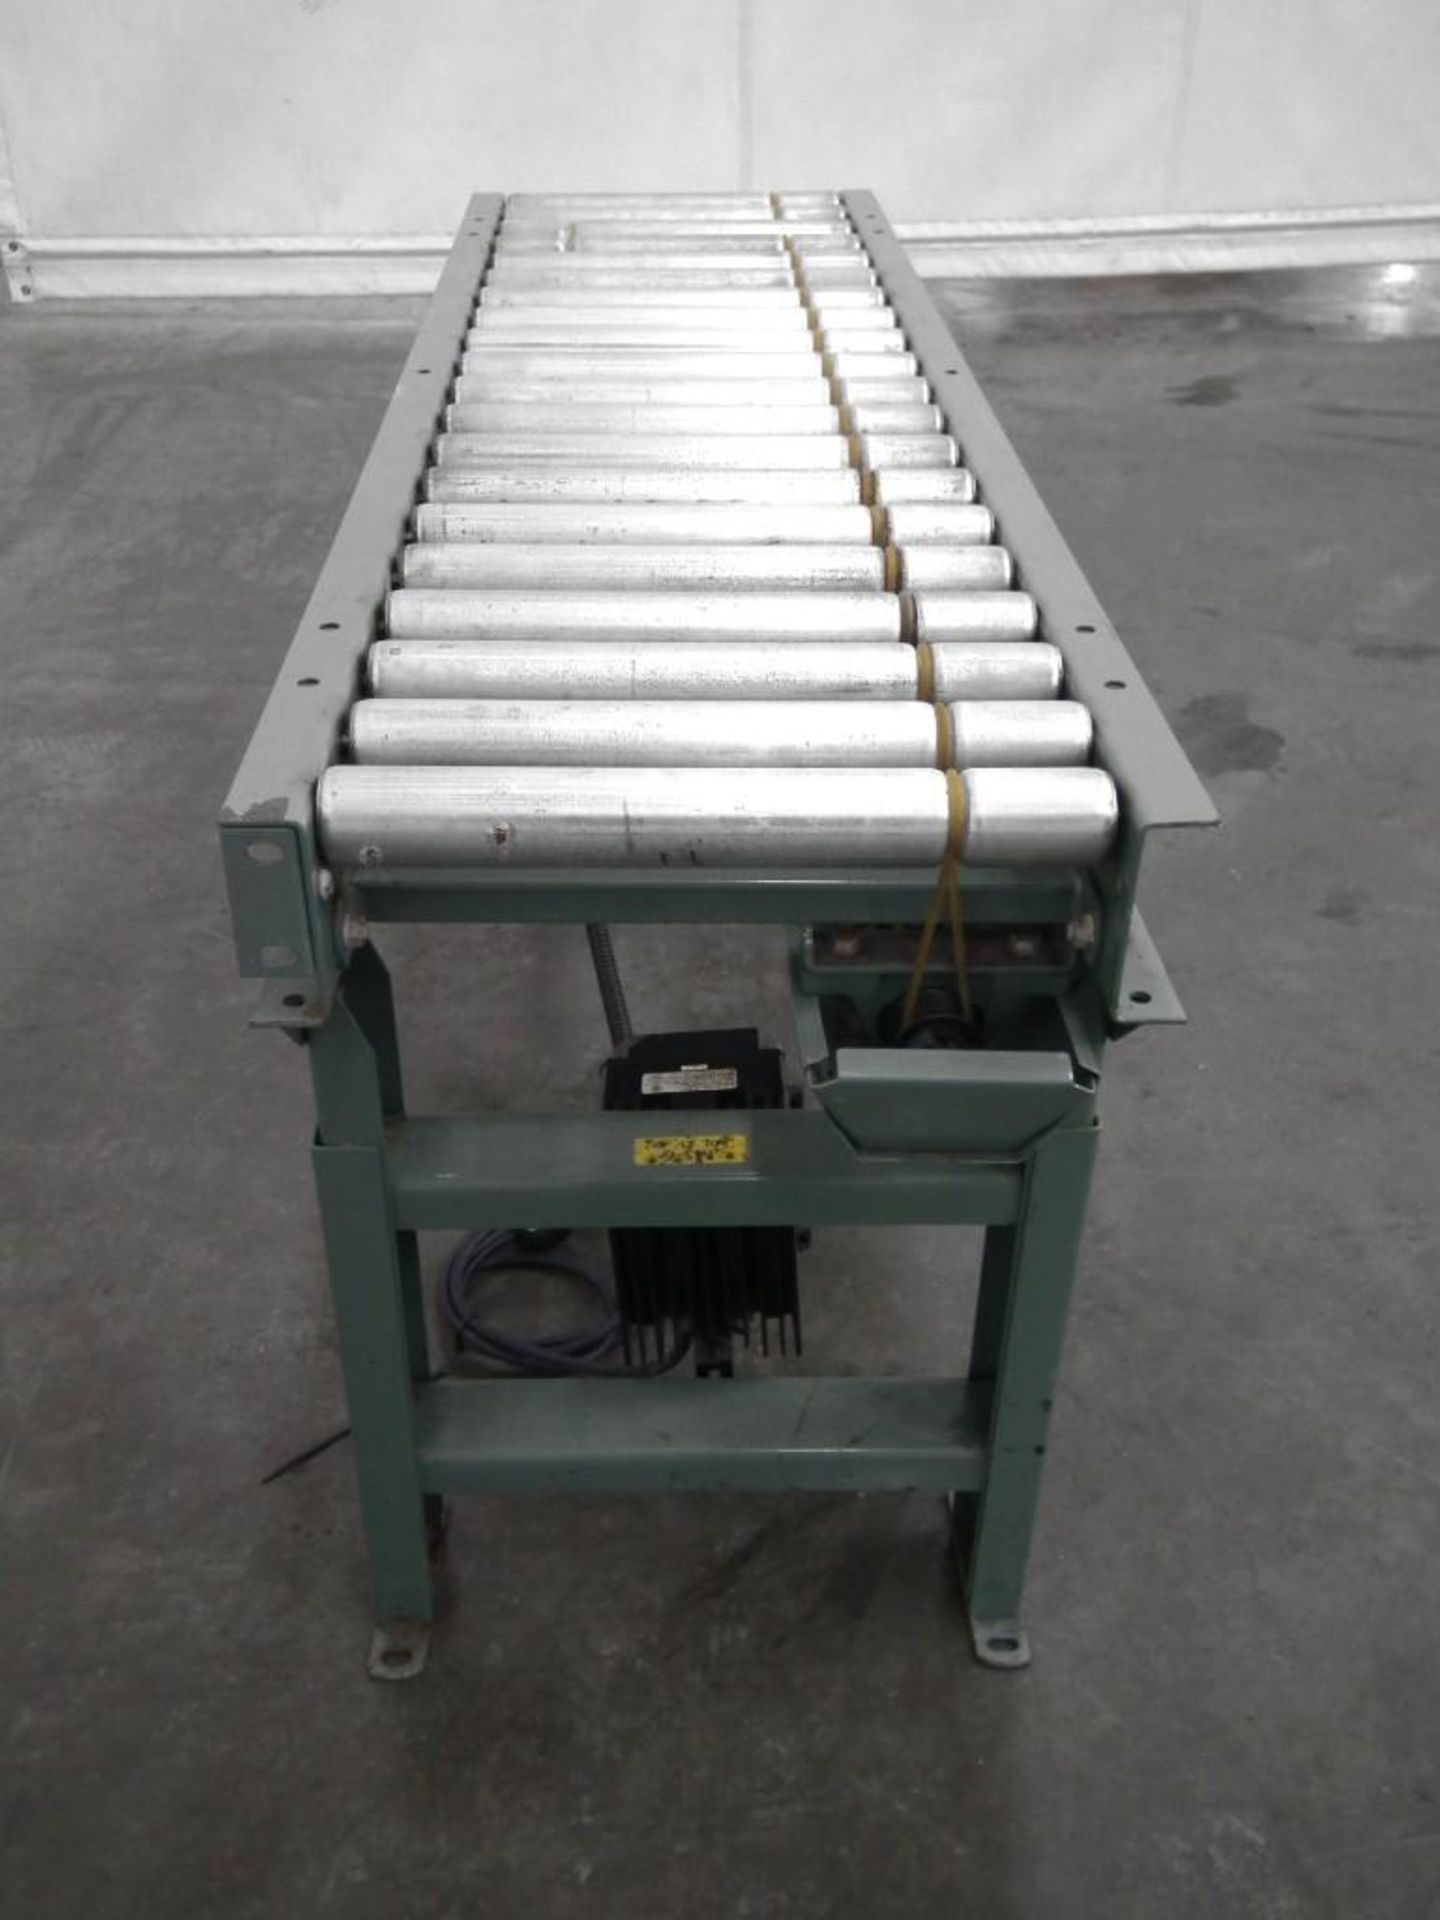 Hytrol 14 Inches Wide x 62 Inches Long Conveyor - Image 9 of 13